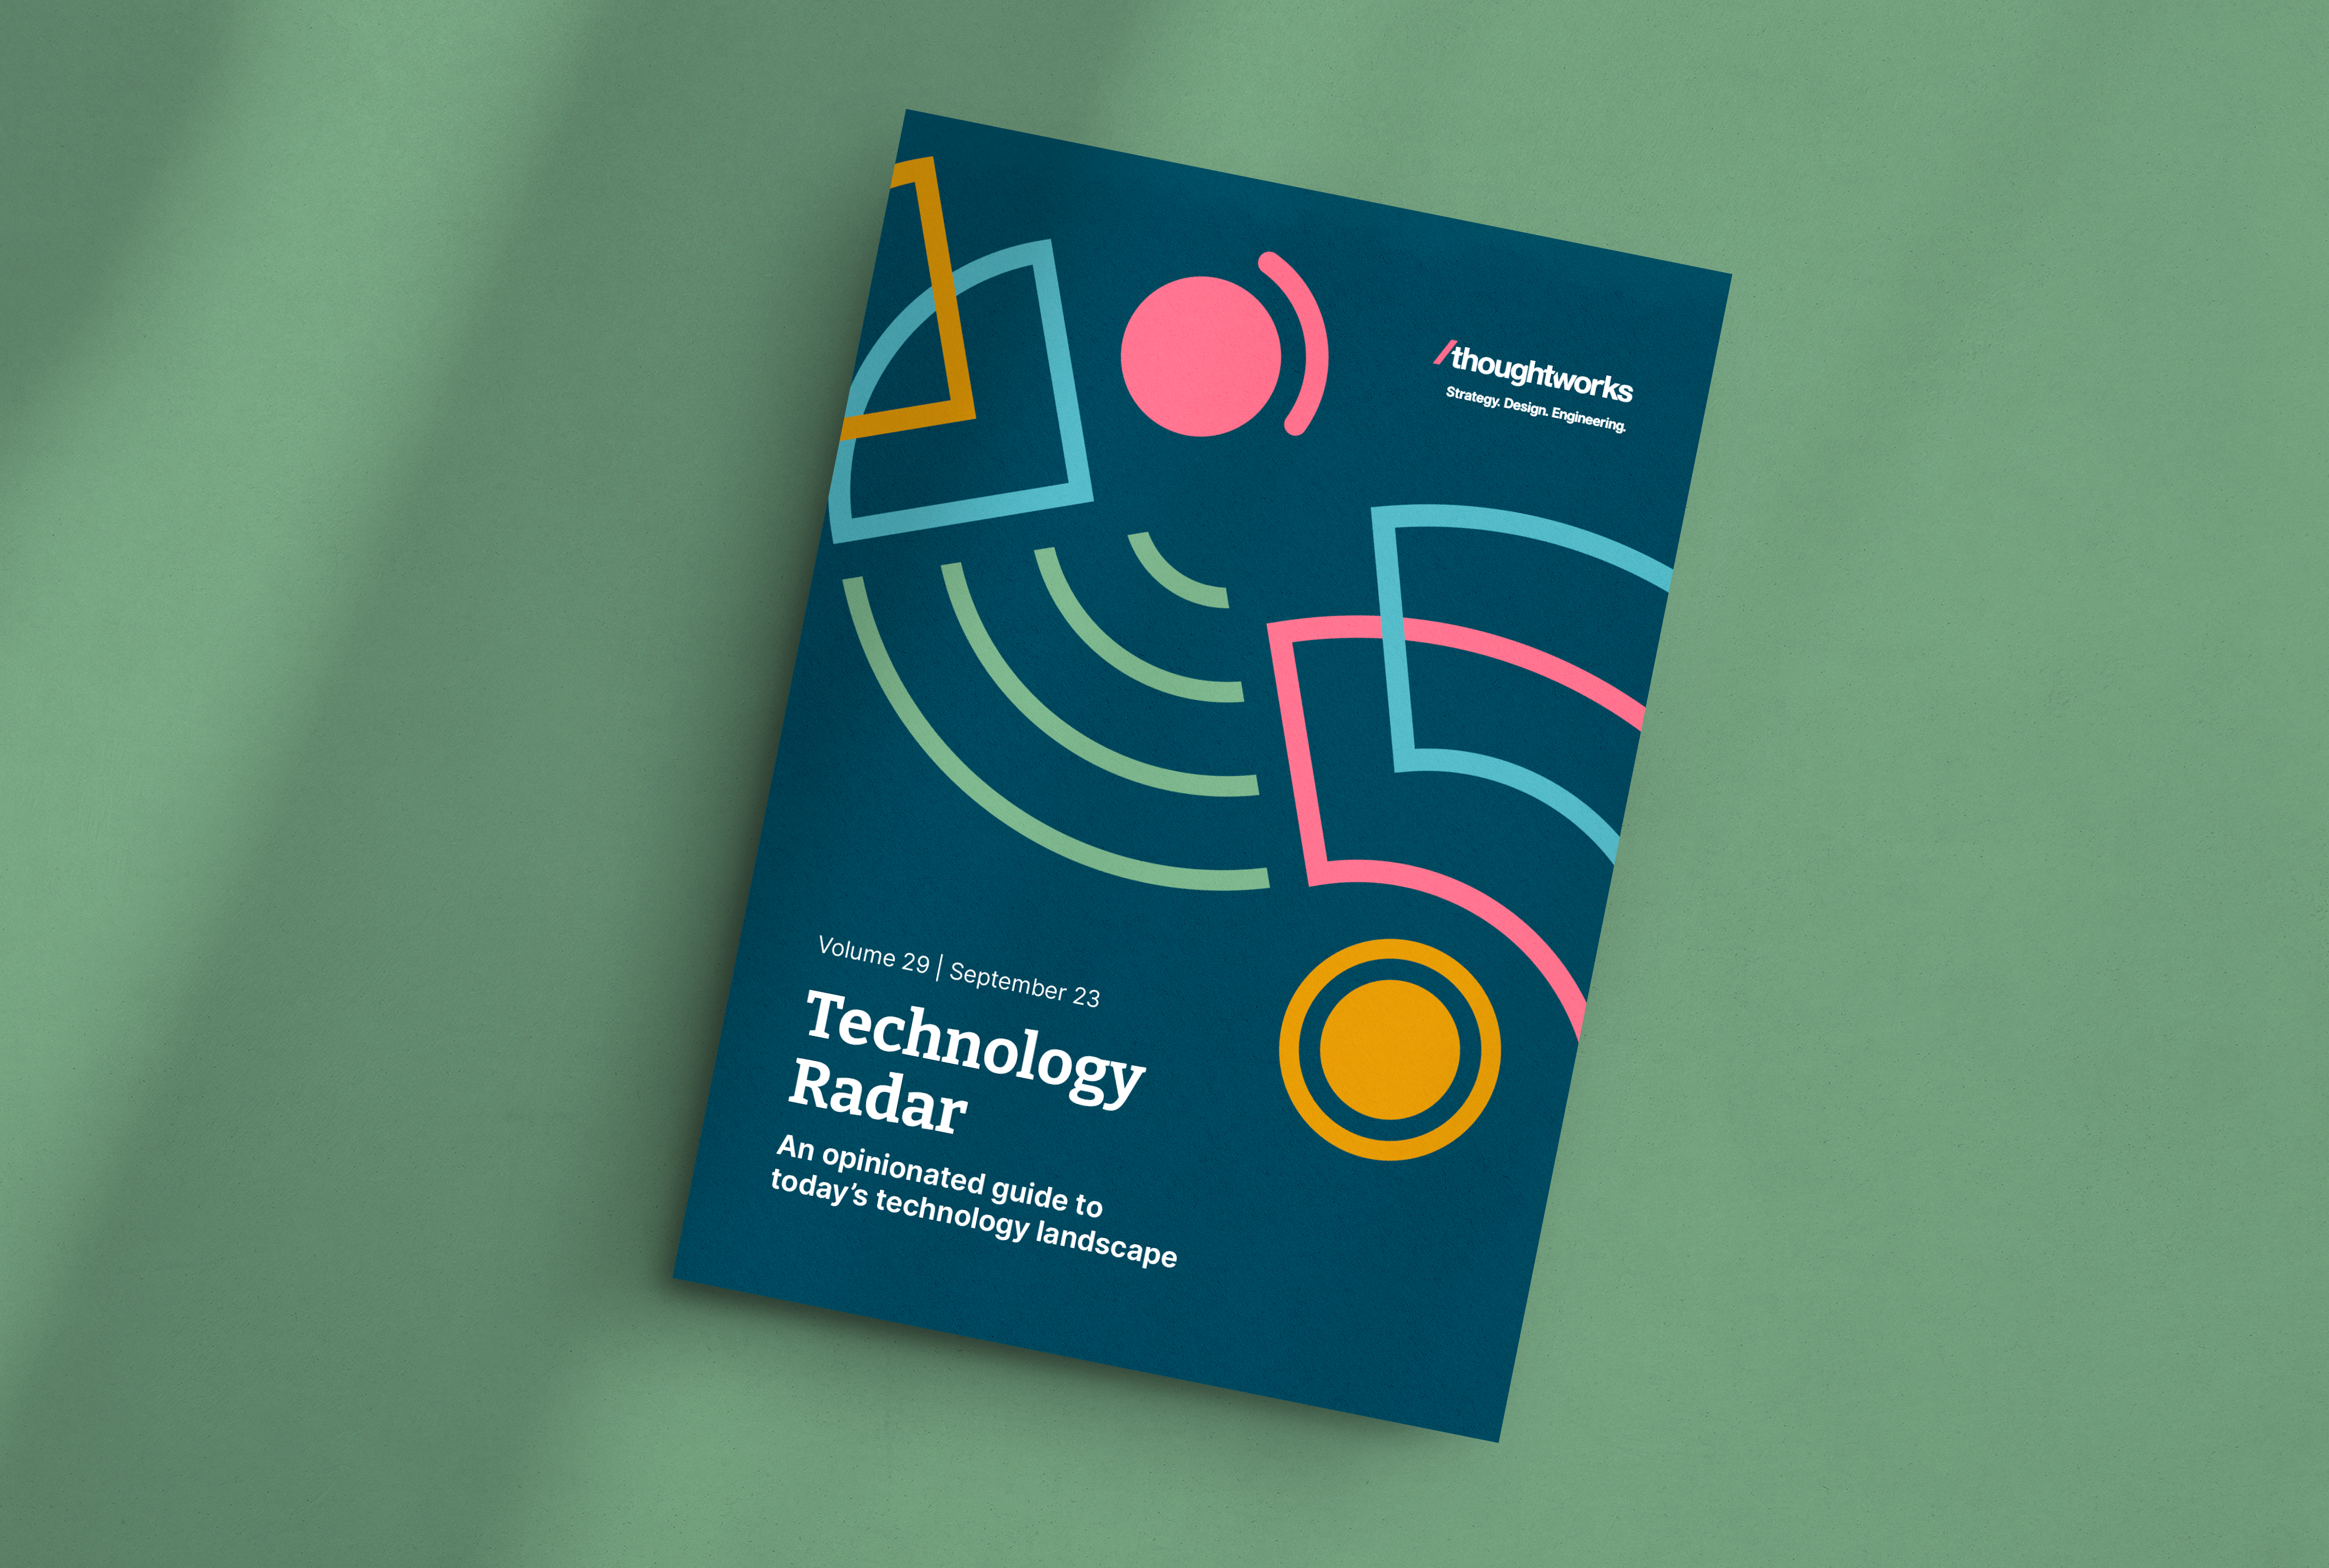 Cover of Technology Radar volume 29 that will be launched in September 2023